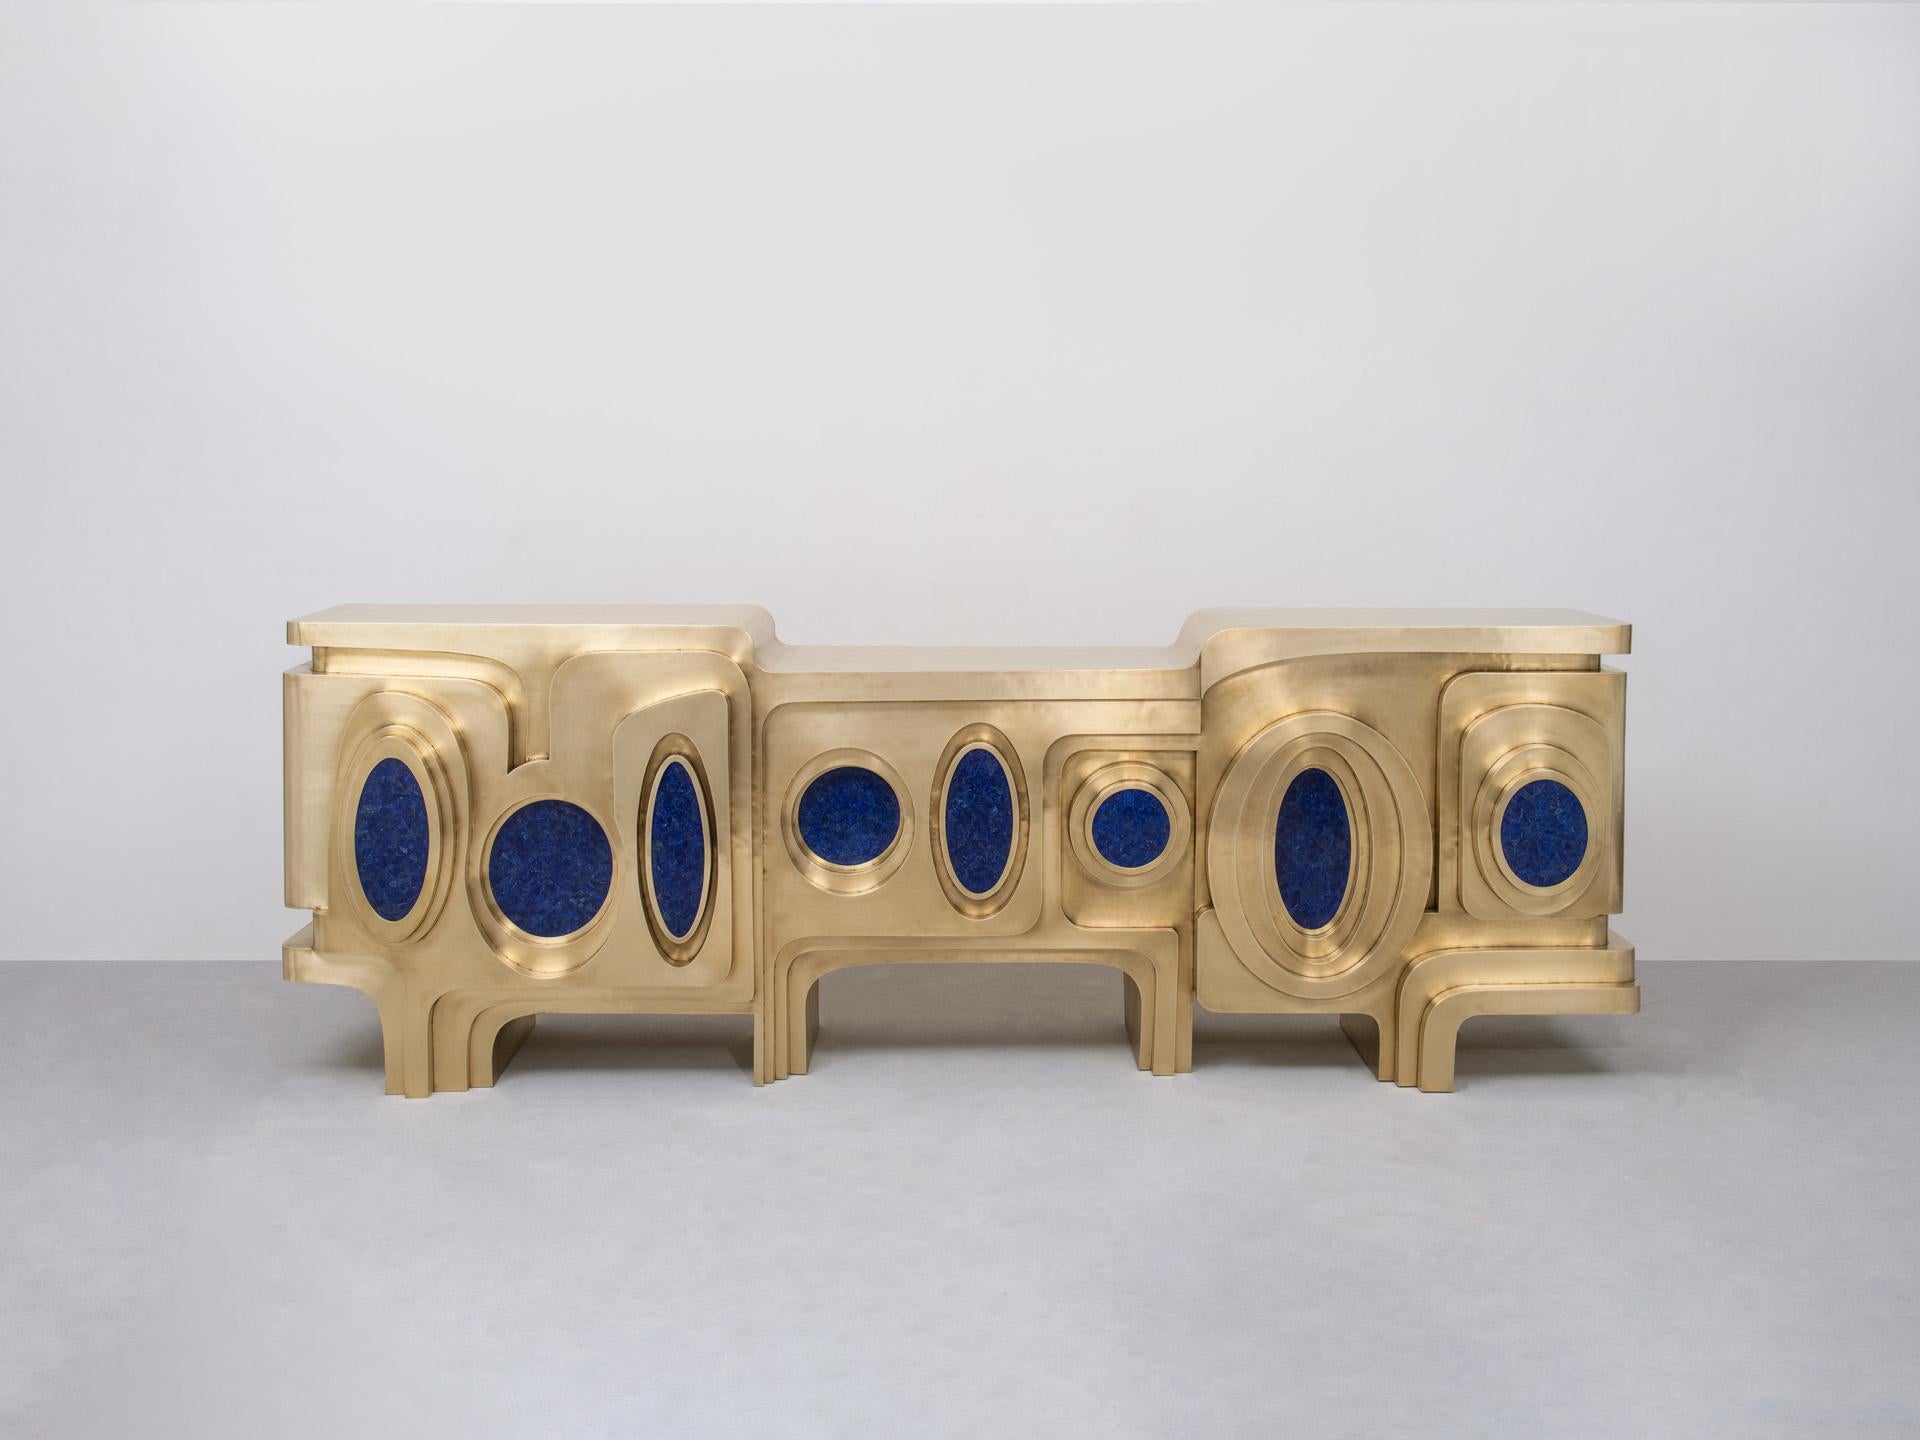 Evocative of a dancing peacock, this striking brass console is inlaid with semi-precious stones. It employs the studio’s distinct technique of hollowed joinery, in which brass sheets are hammered and joined together with great skill to create a